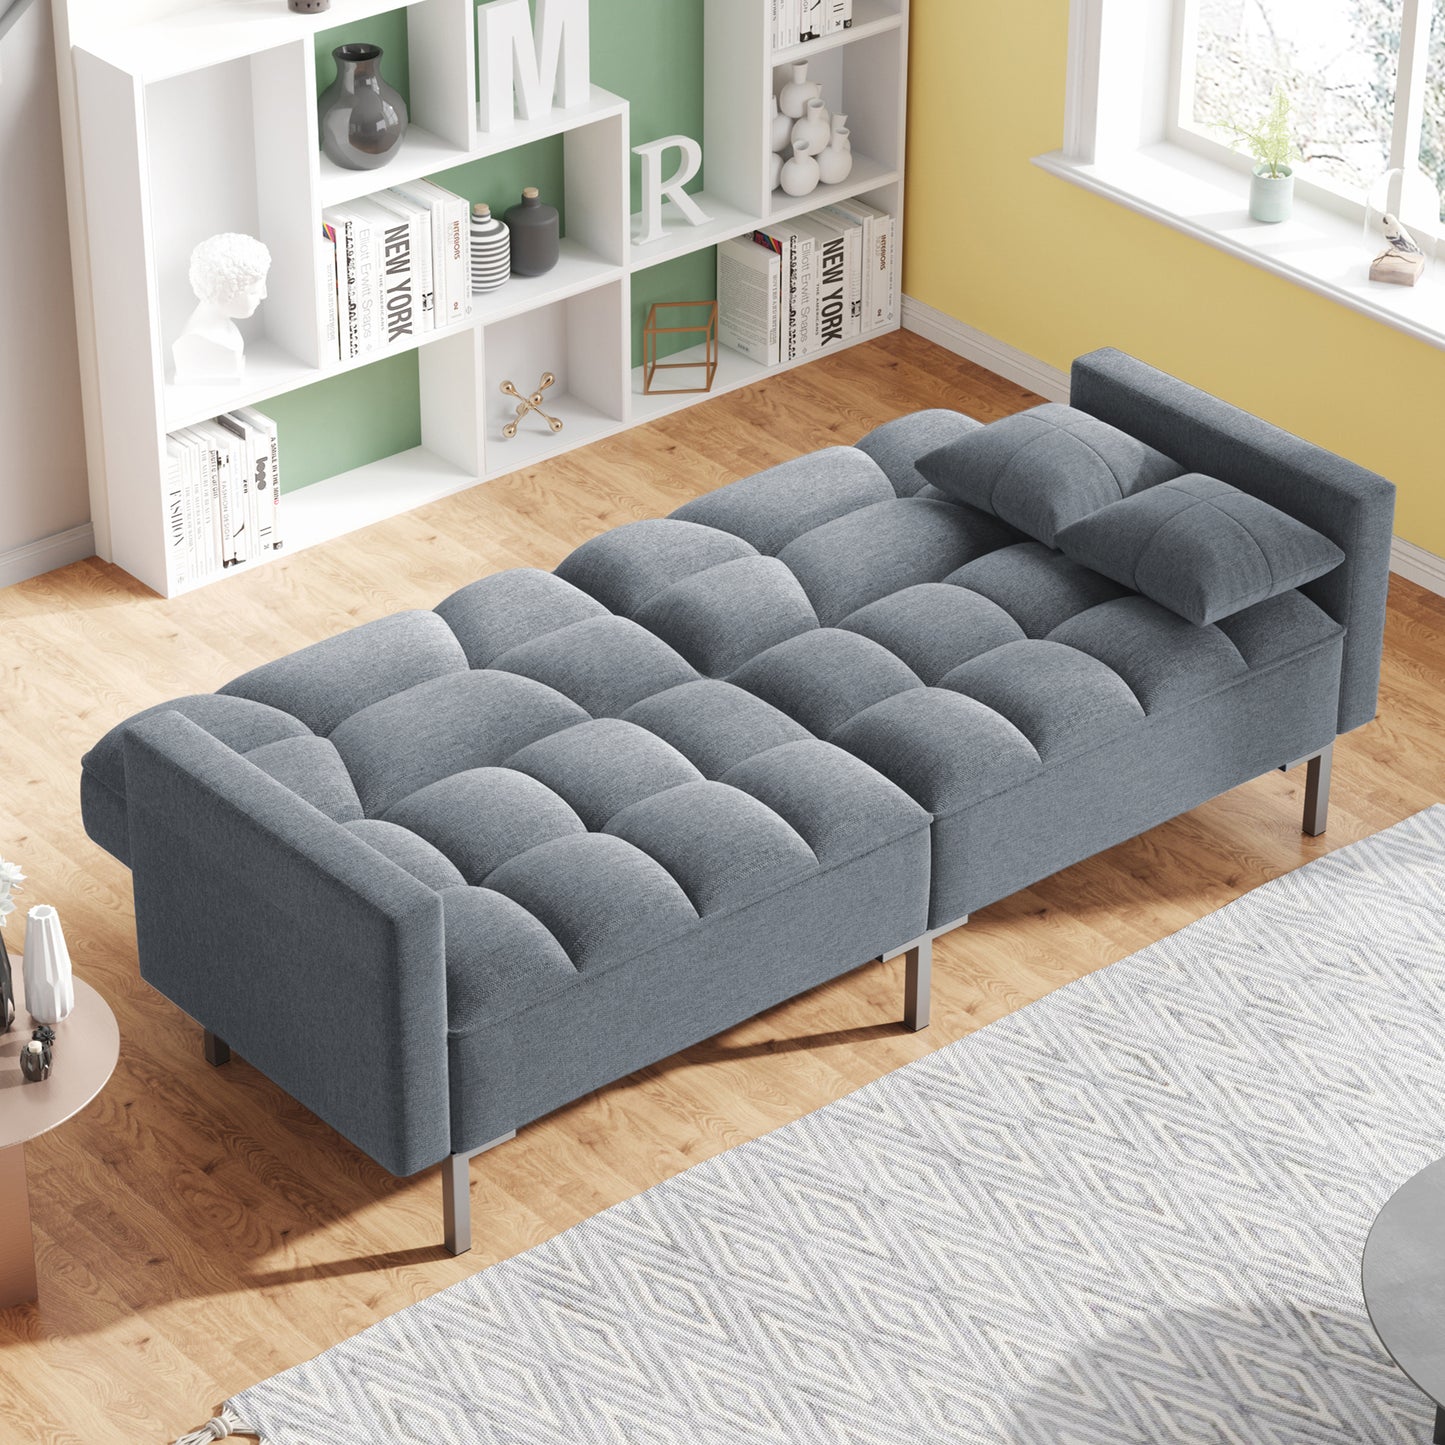 Modern Linen Upholstered Convertible Folding Futon Sofa Bed for Compact Living Space, an Apartment or Dorm